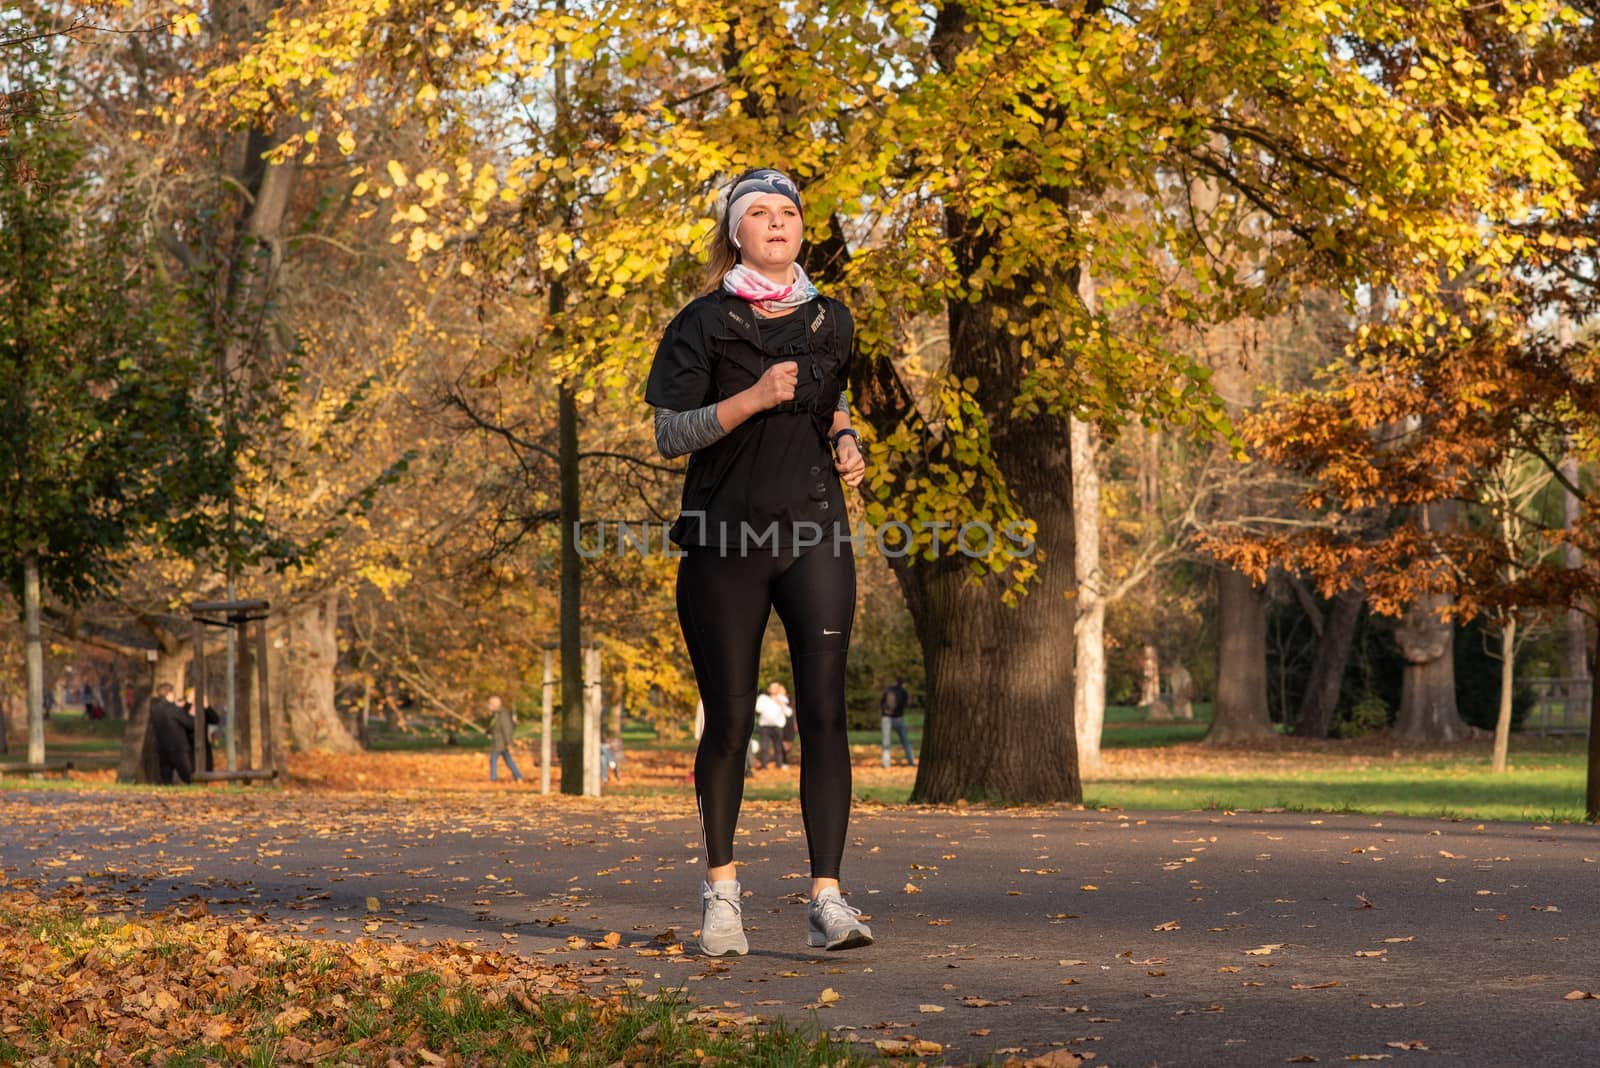 11/14/2020. Park Stromovka. Prague czech Republic. A woman is running in the park on a Sunday winter day.